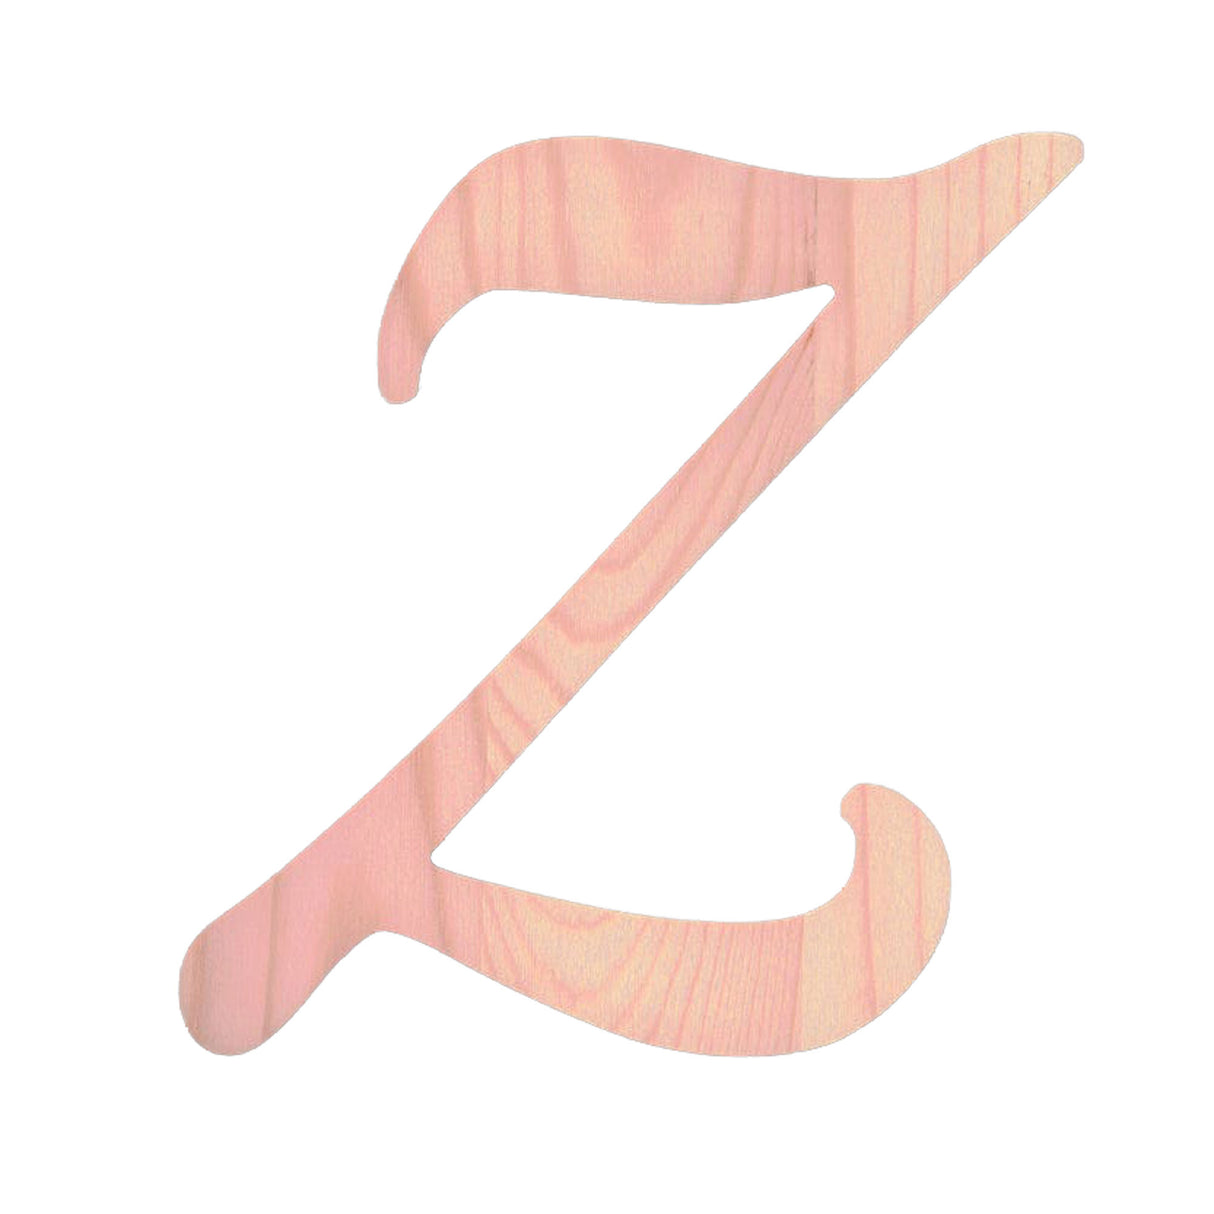 Unfinished Wooden Playball Italic Letter Z (6.25 Inches) in Beige color,  shape